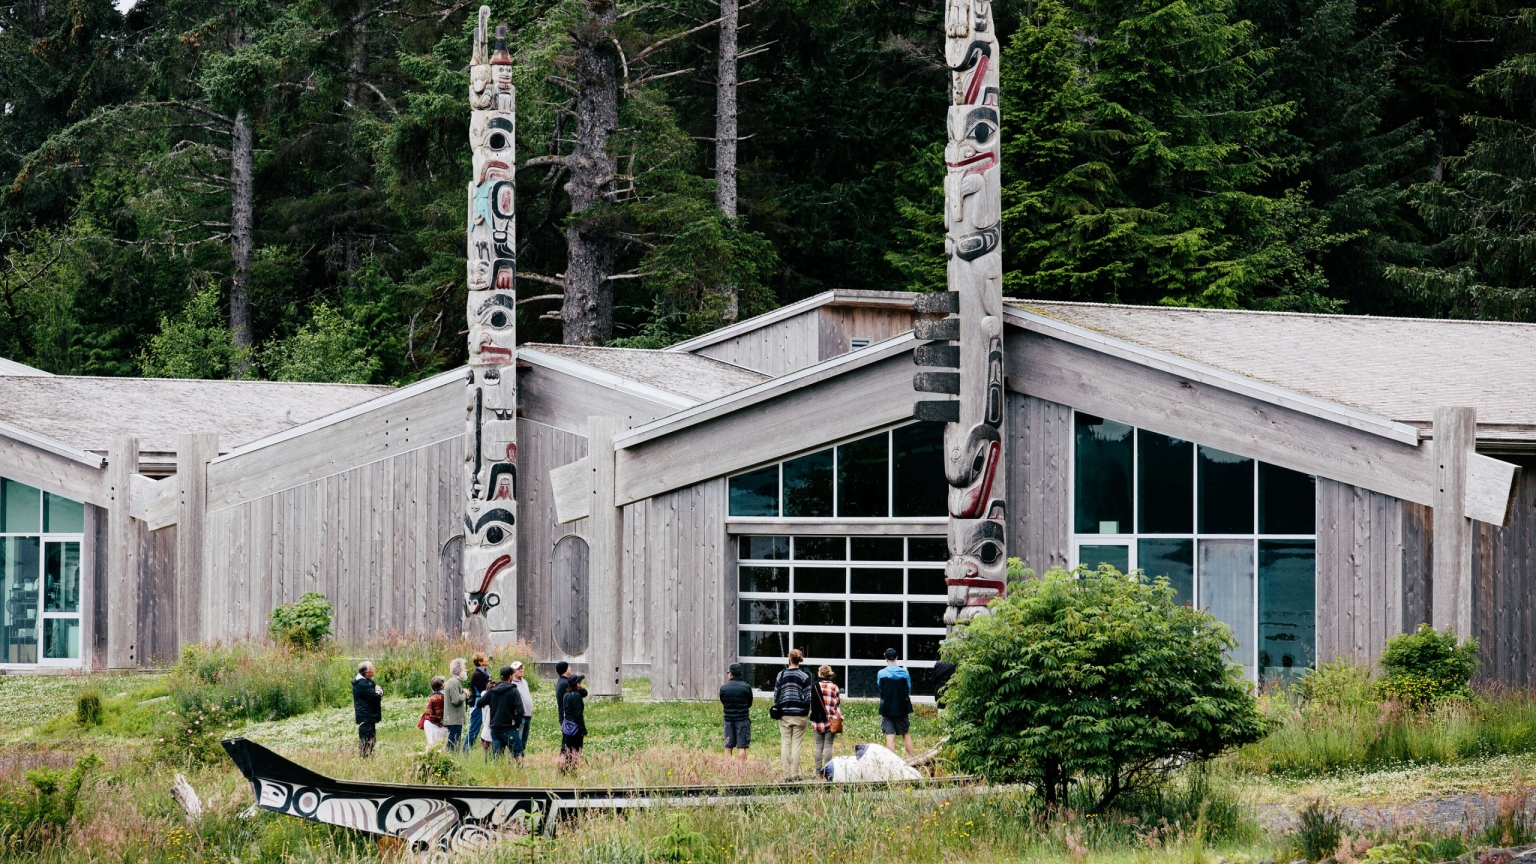 An outside view of the Haida Heritage Centre in Skidegate. Several people are gather around the front.